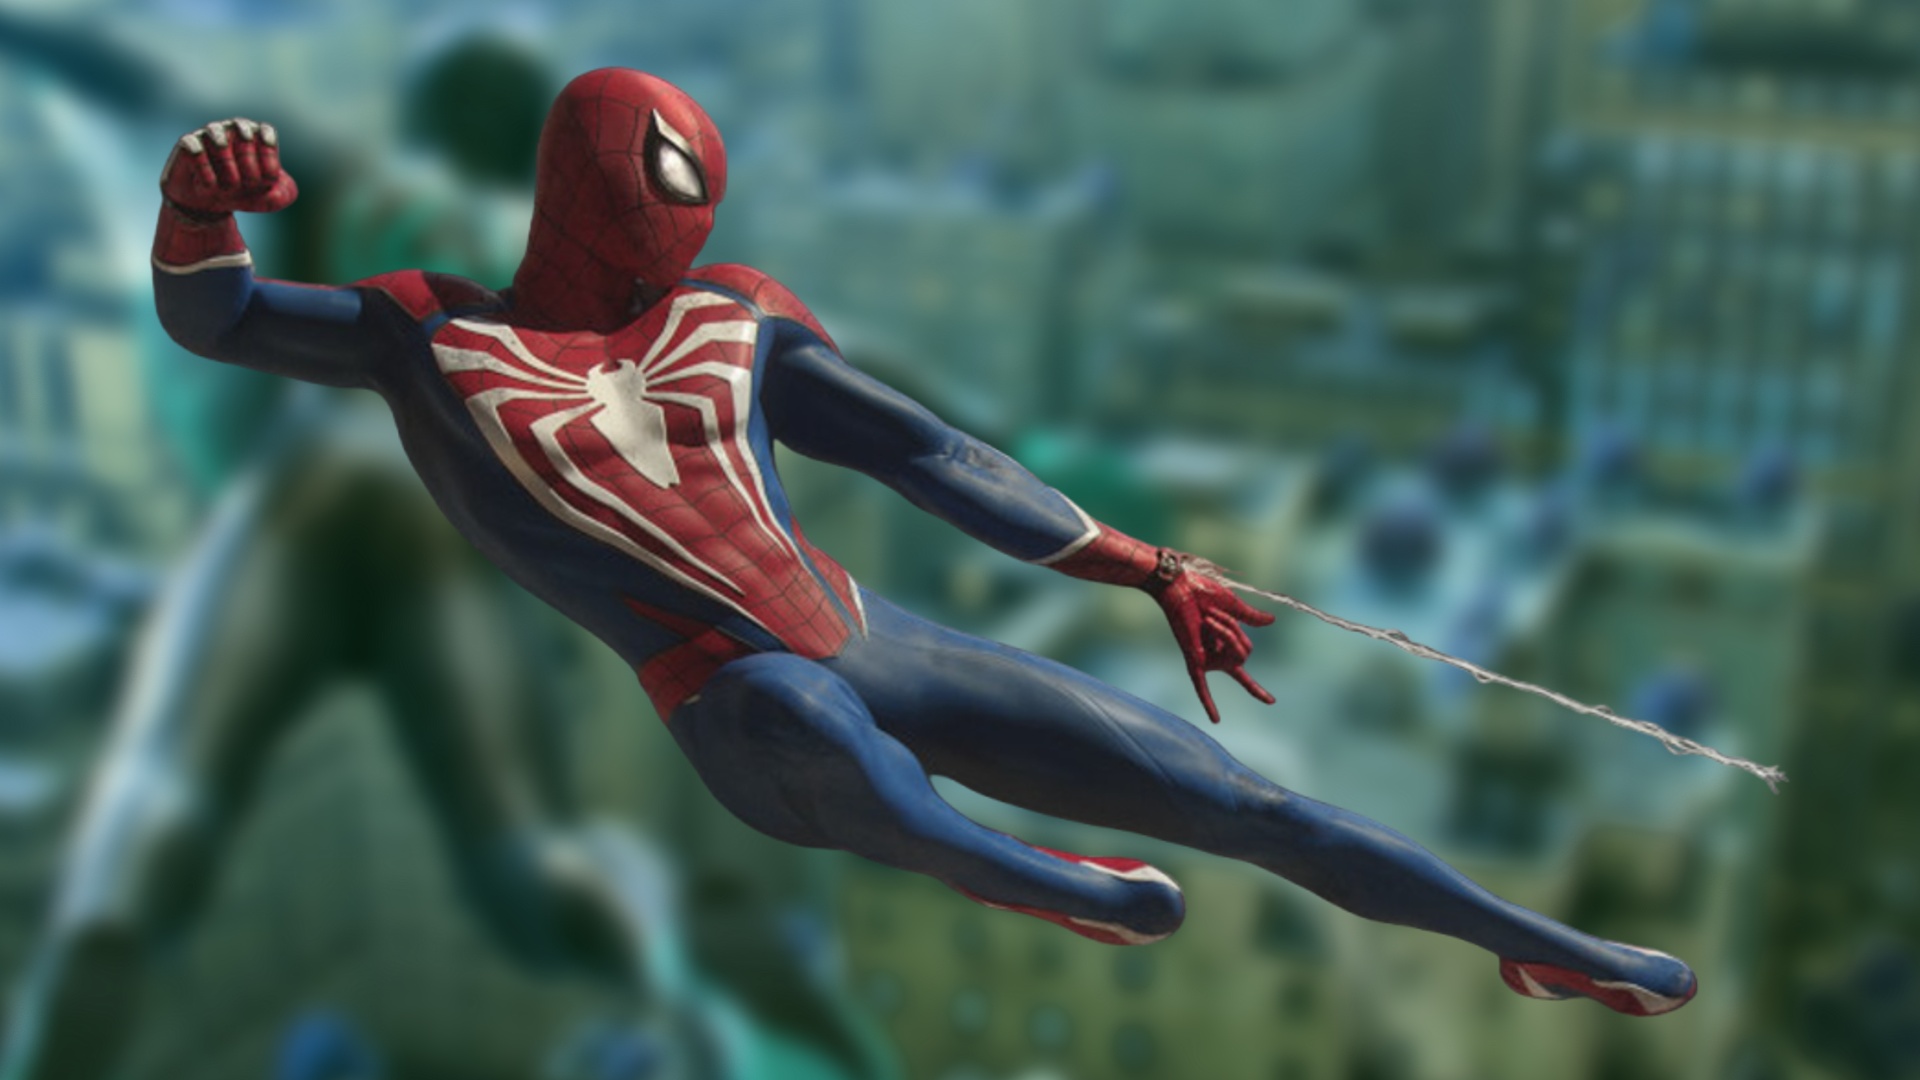 Everything You Need to Know About Marvel's Spider-Man 2 Pre-Orders